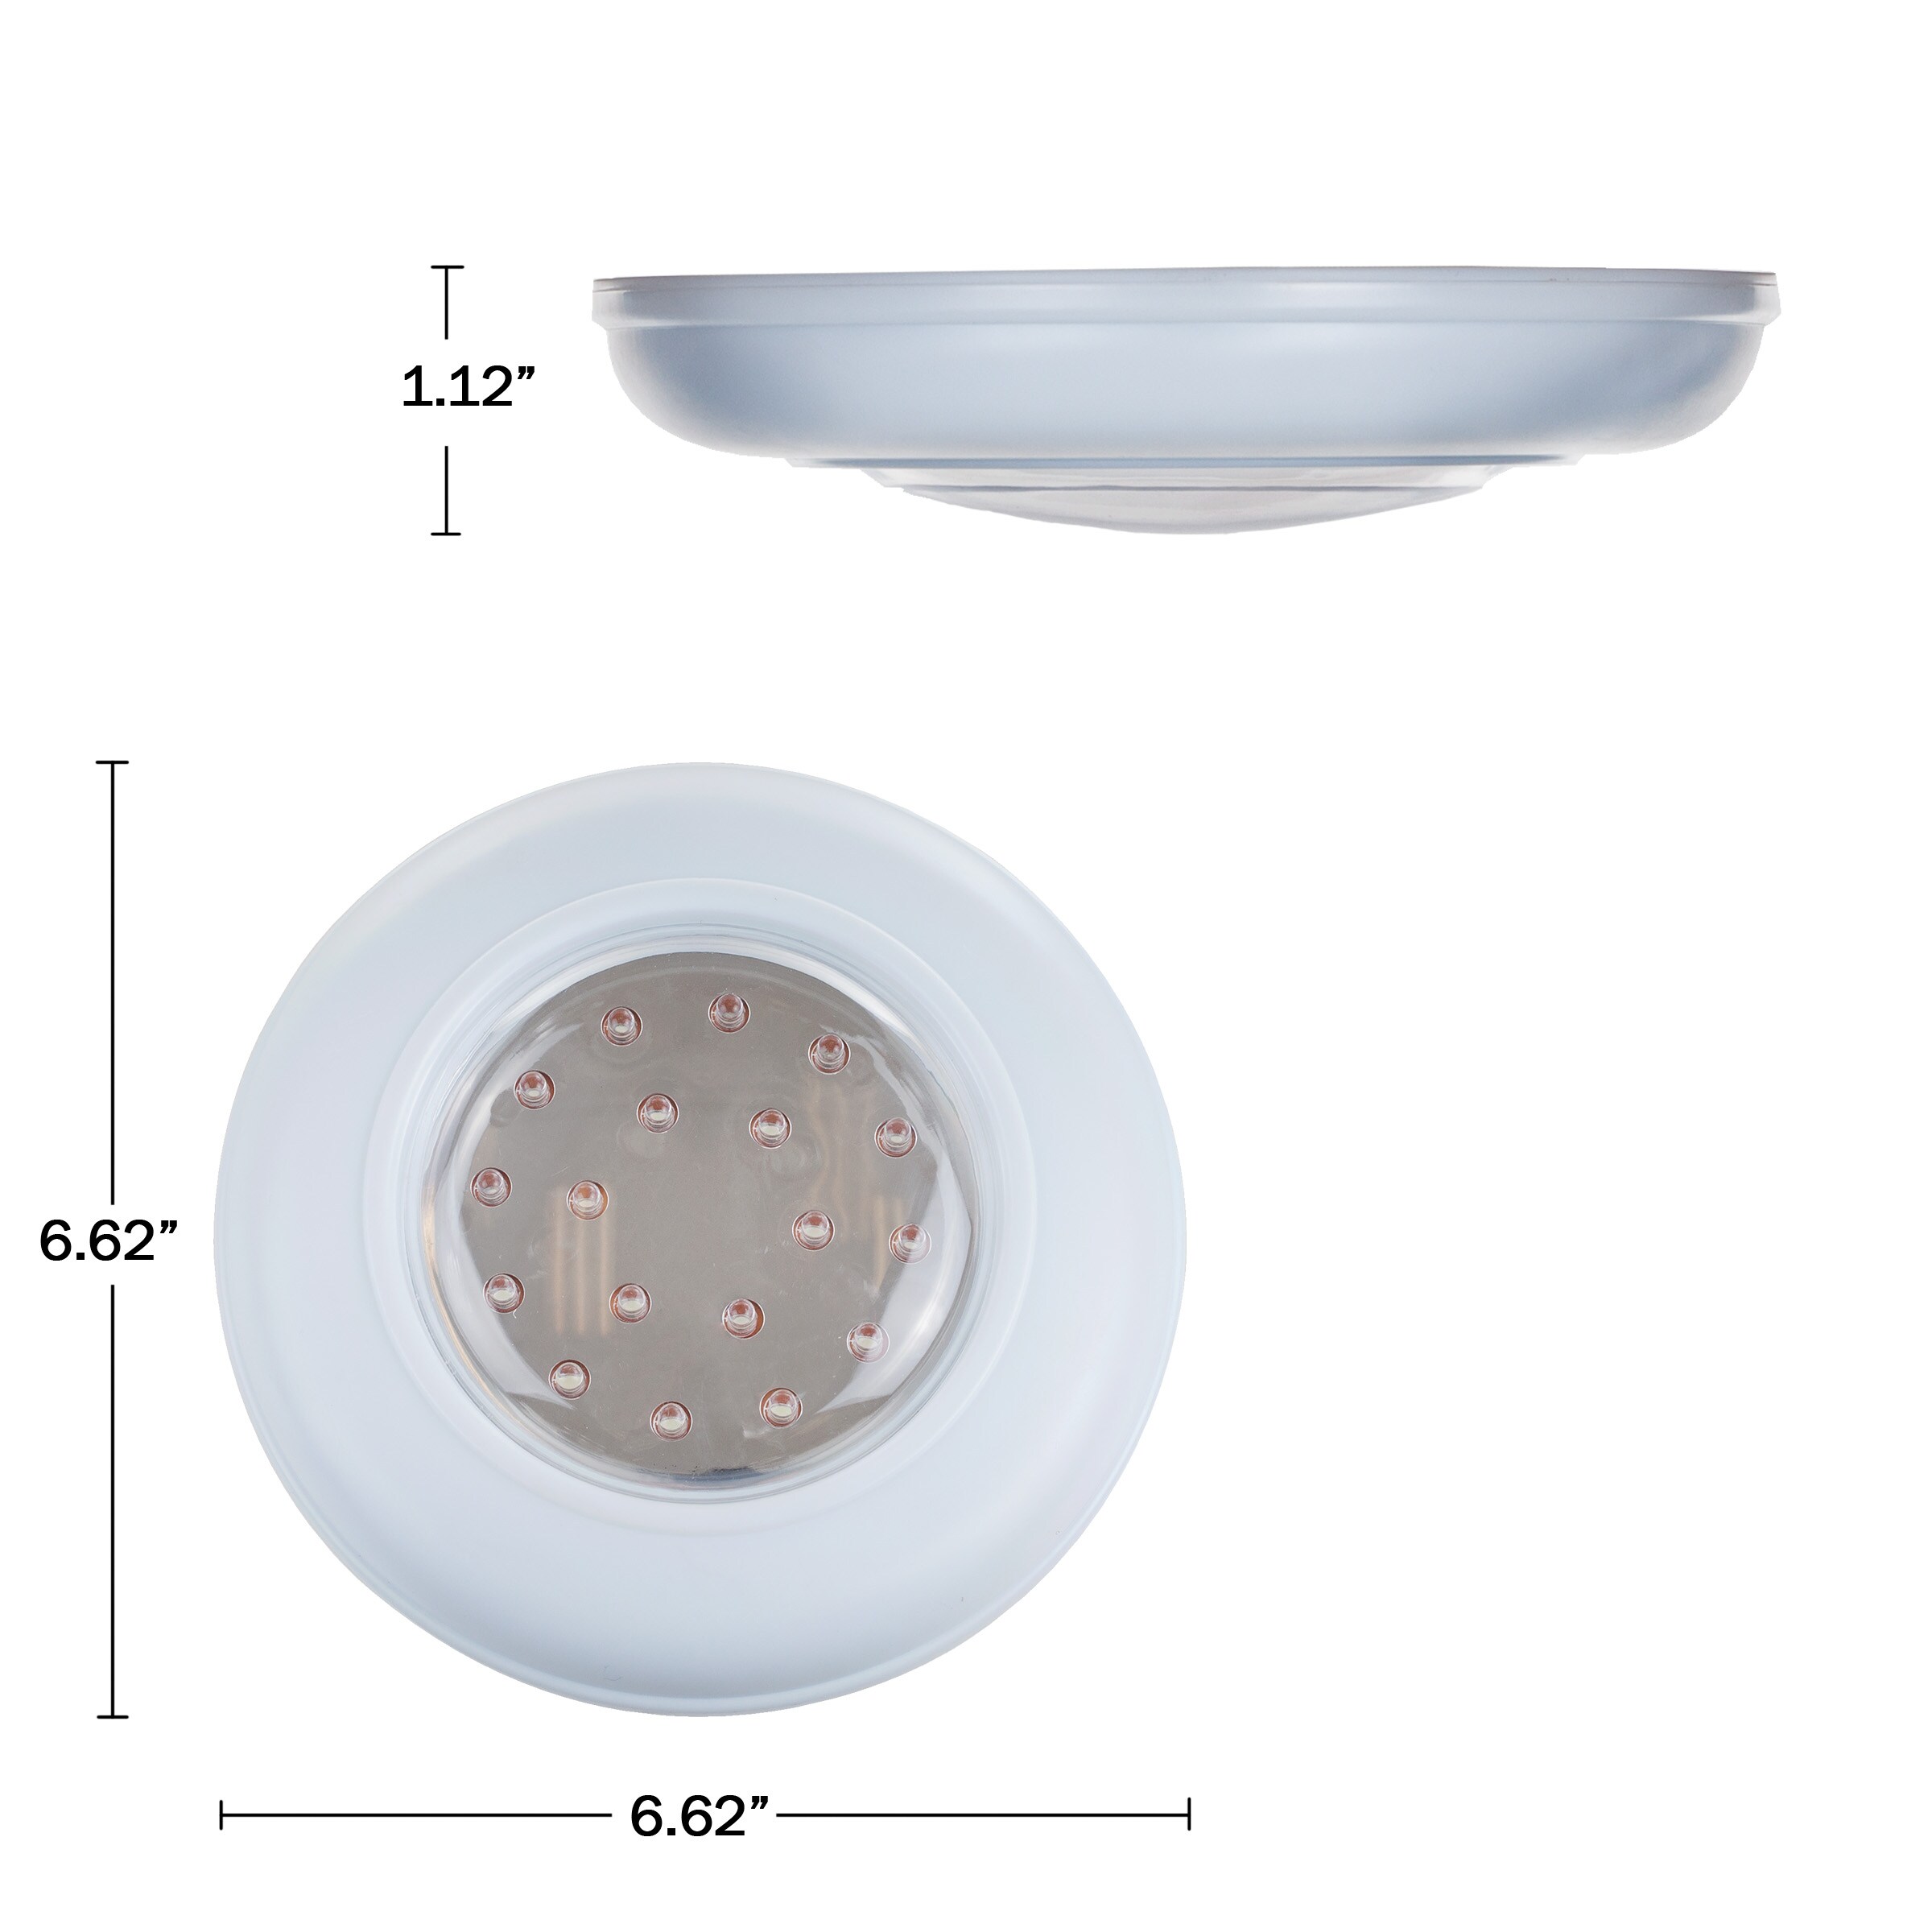 Trademark Cordless Ceiling Wall Light with Remote Control Light